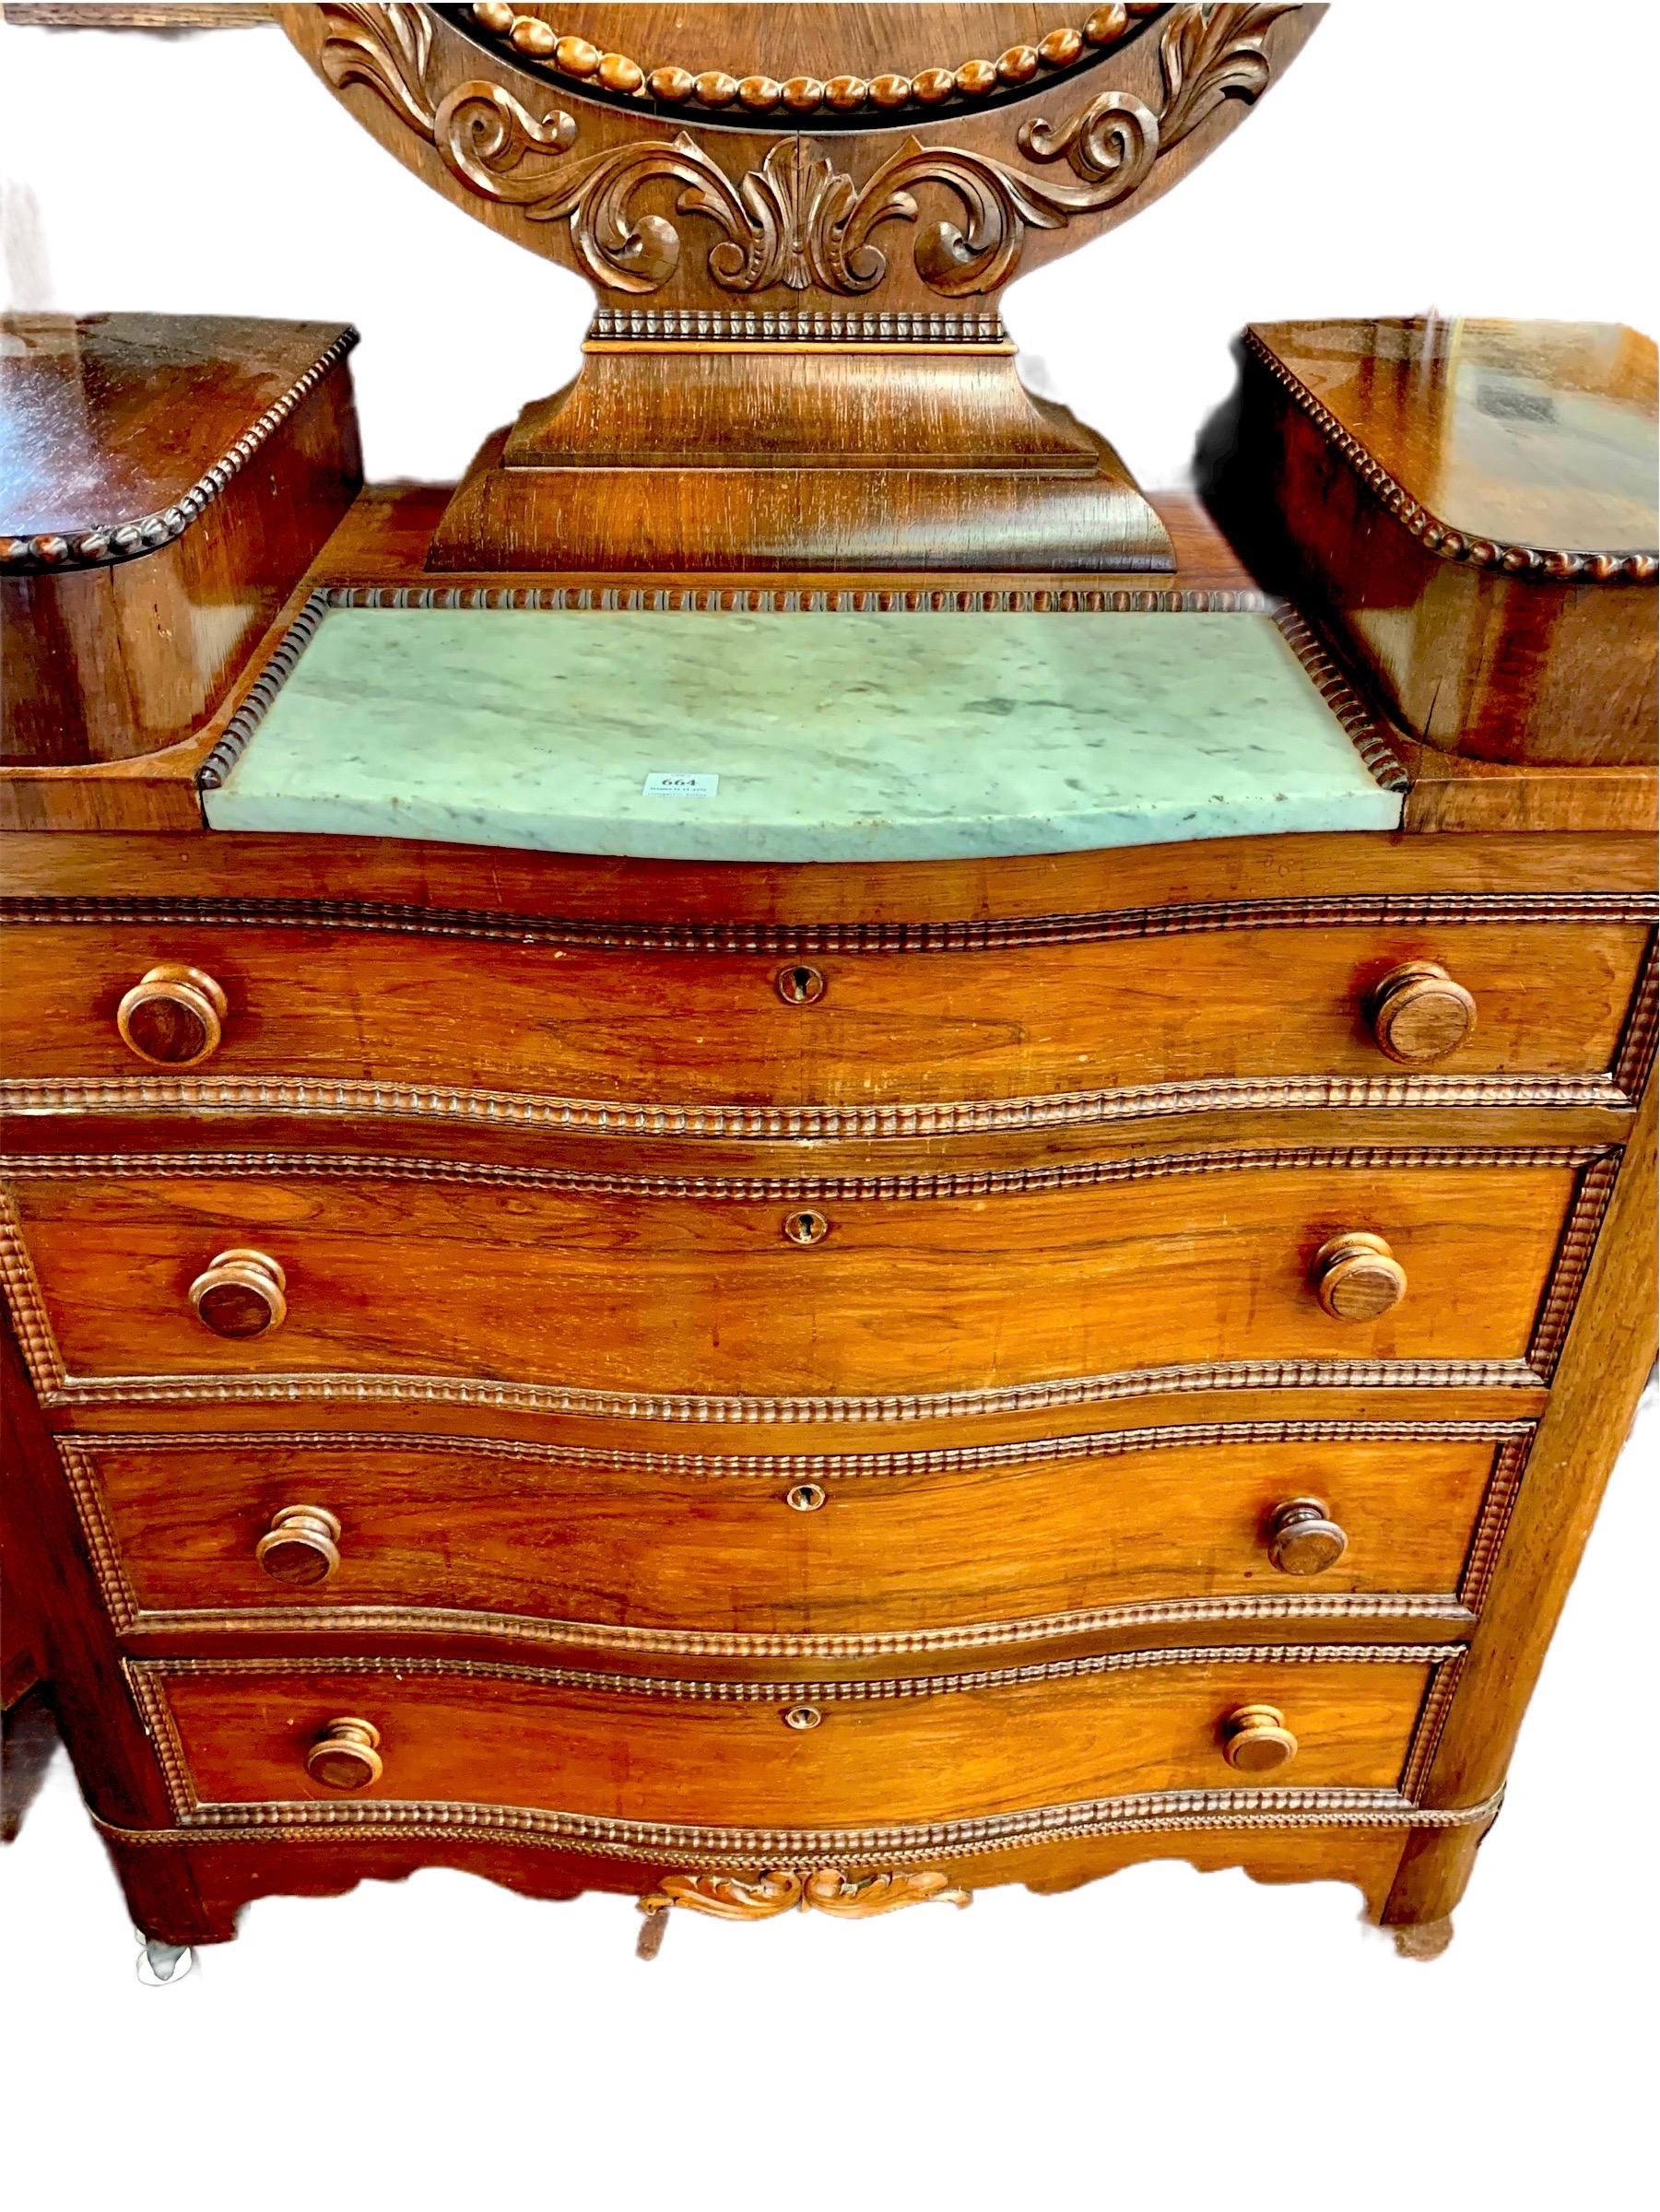 A stunning antique American Classical rosewood dresser and yoke mirror having two lift top glove drawers, a Carrera marble top and four serpentine drawers below, on double porcelain casters. There is delicate beading around the mirror and glove